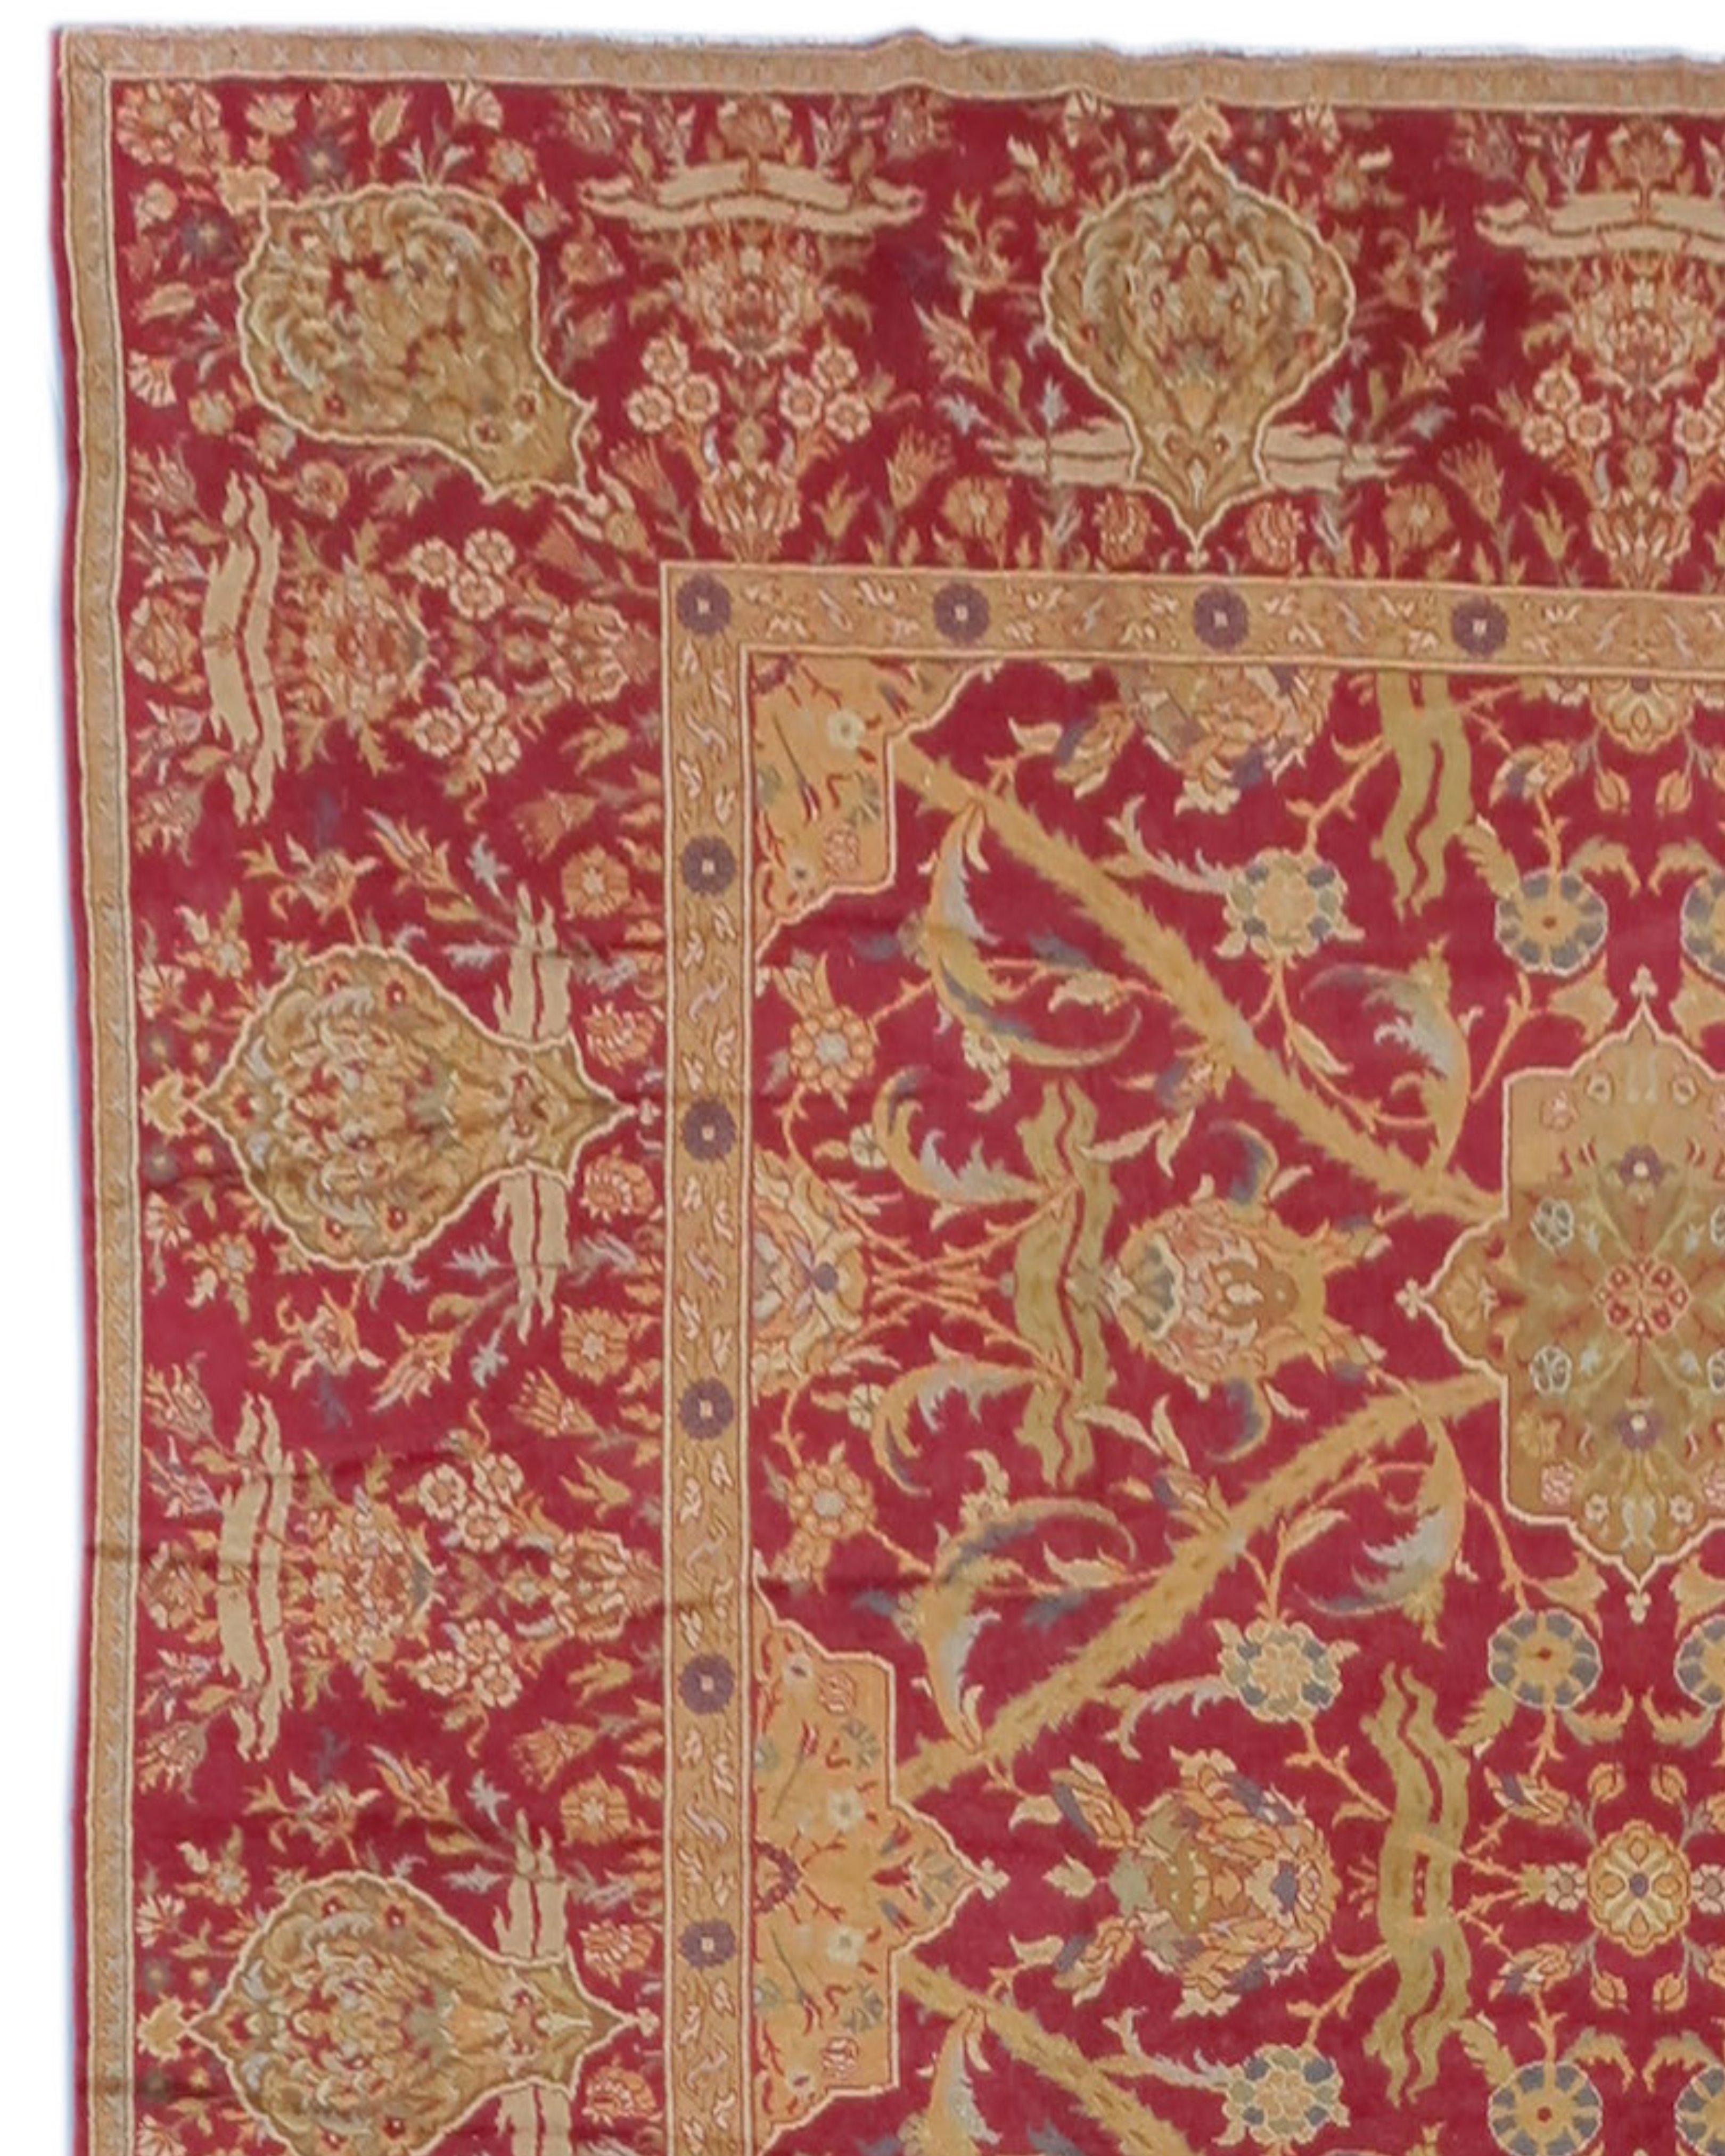 Hand-Knotted Antique Ottoman-Style Carpet, Late 19th Century For Sale